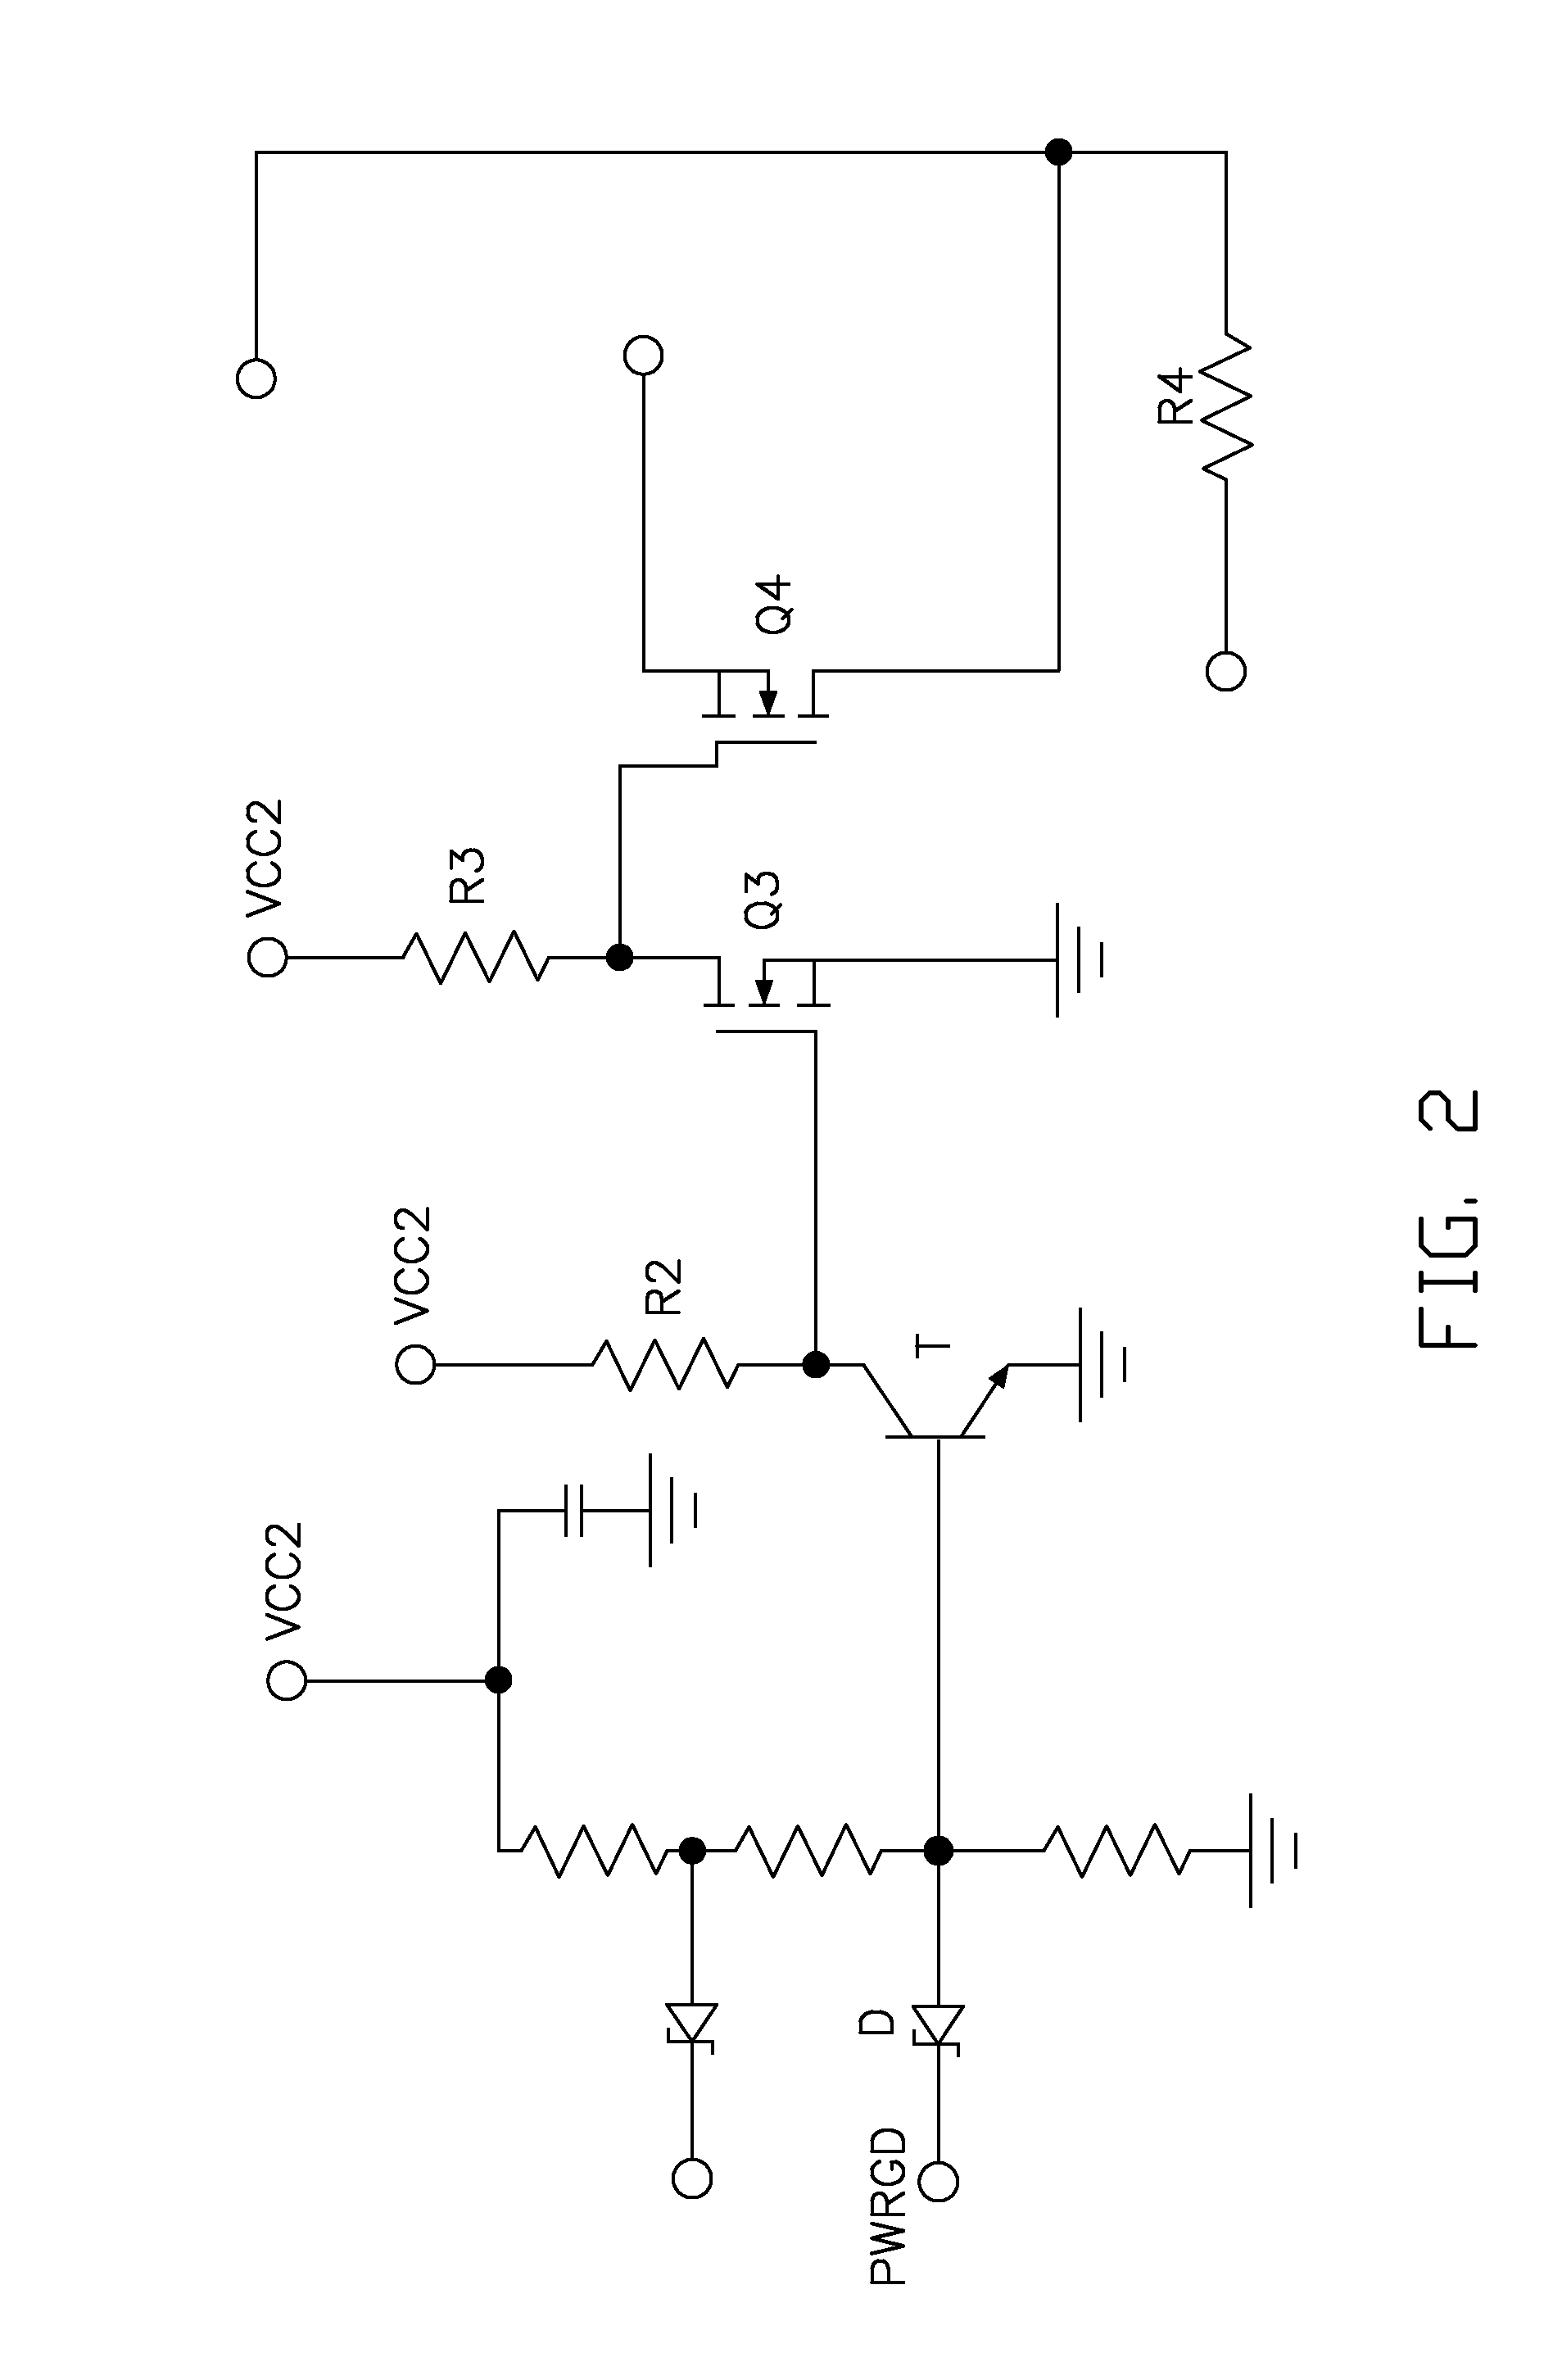 Power supply circuit for motherboard